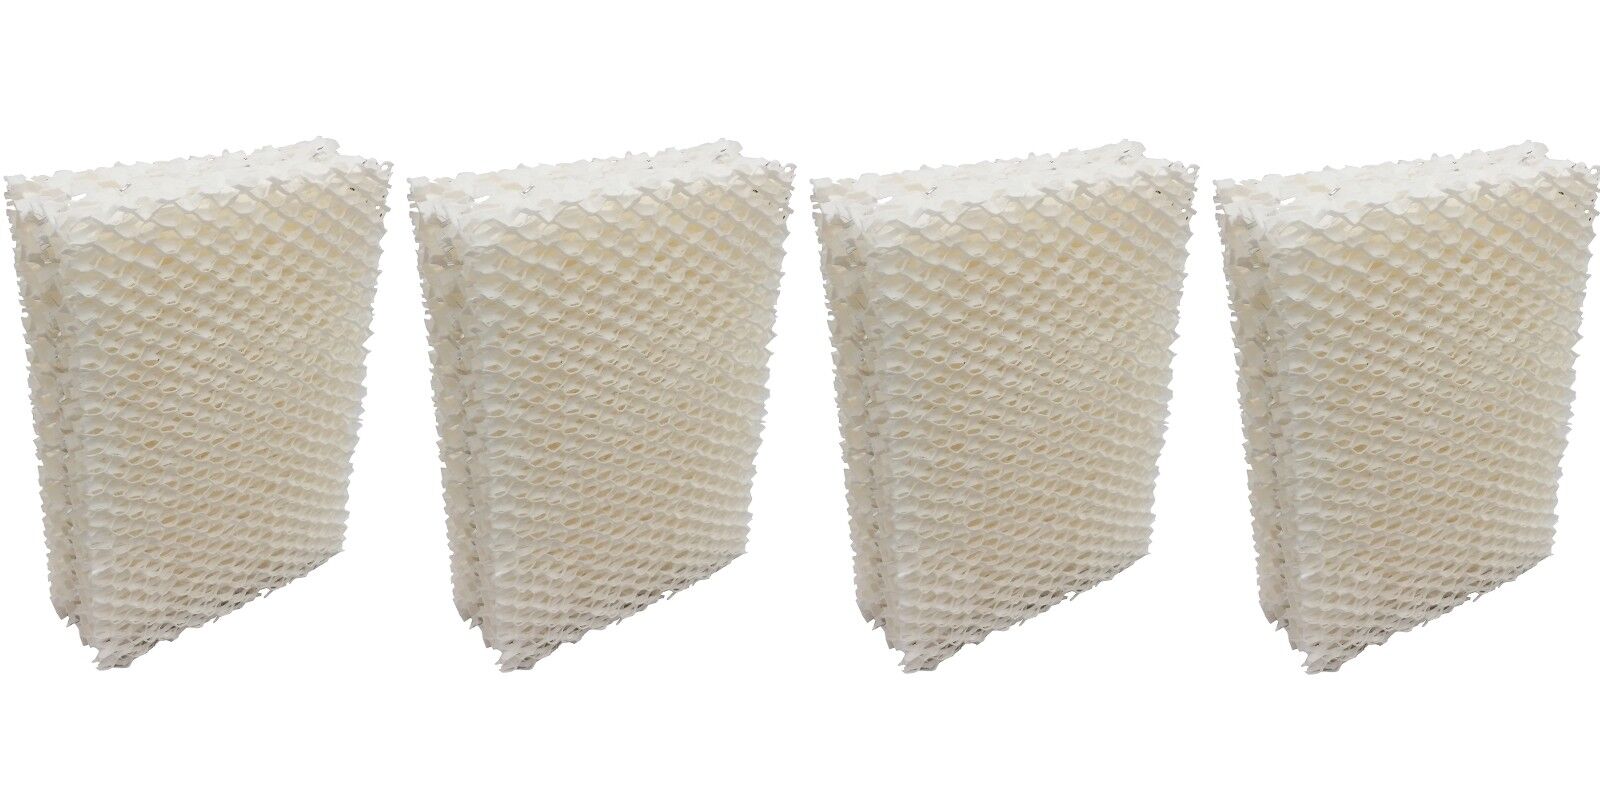 EFP Humidifier Wick Filters for Emerson Essick Air HDC-12 - 4 Pack